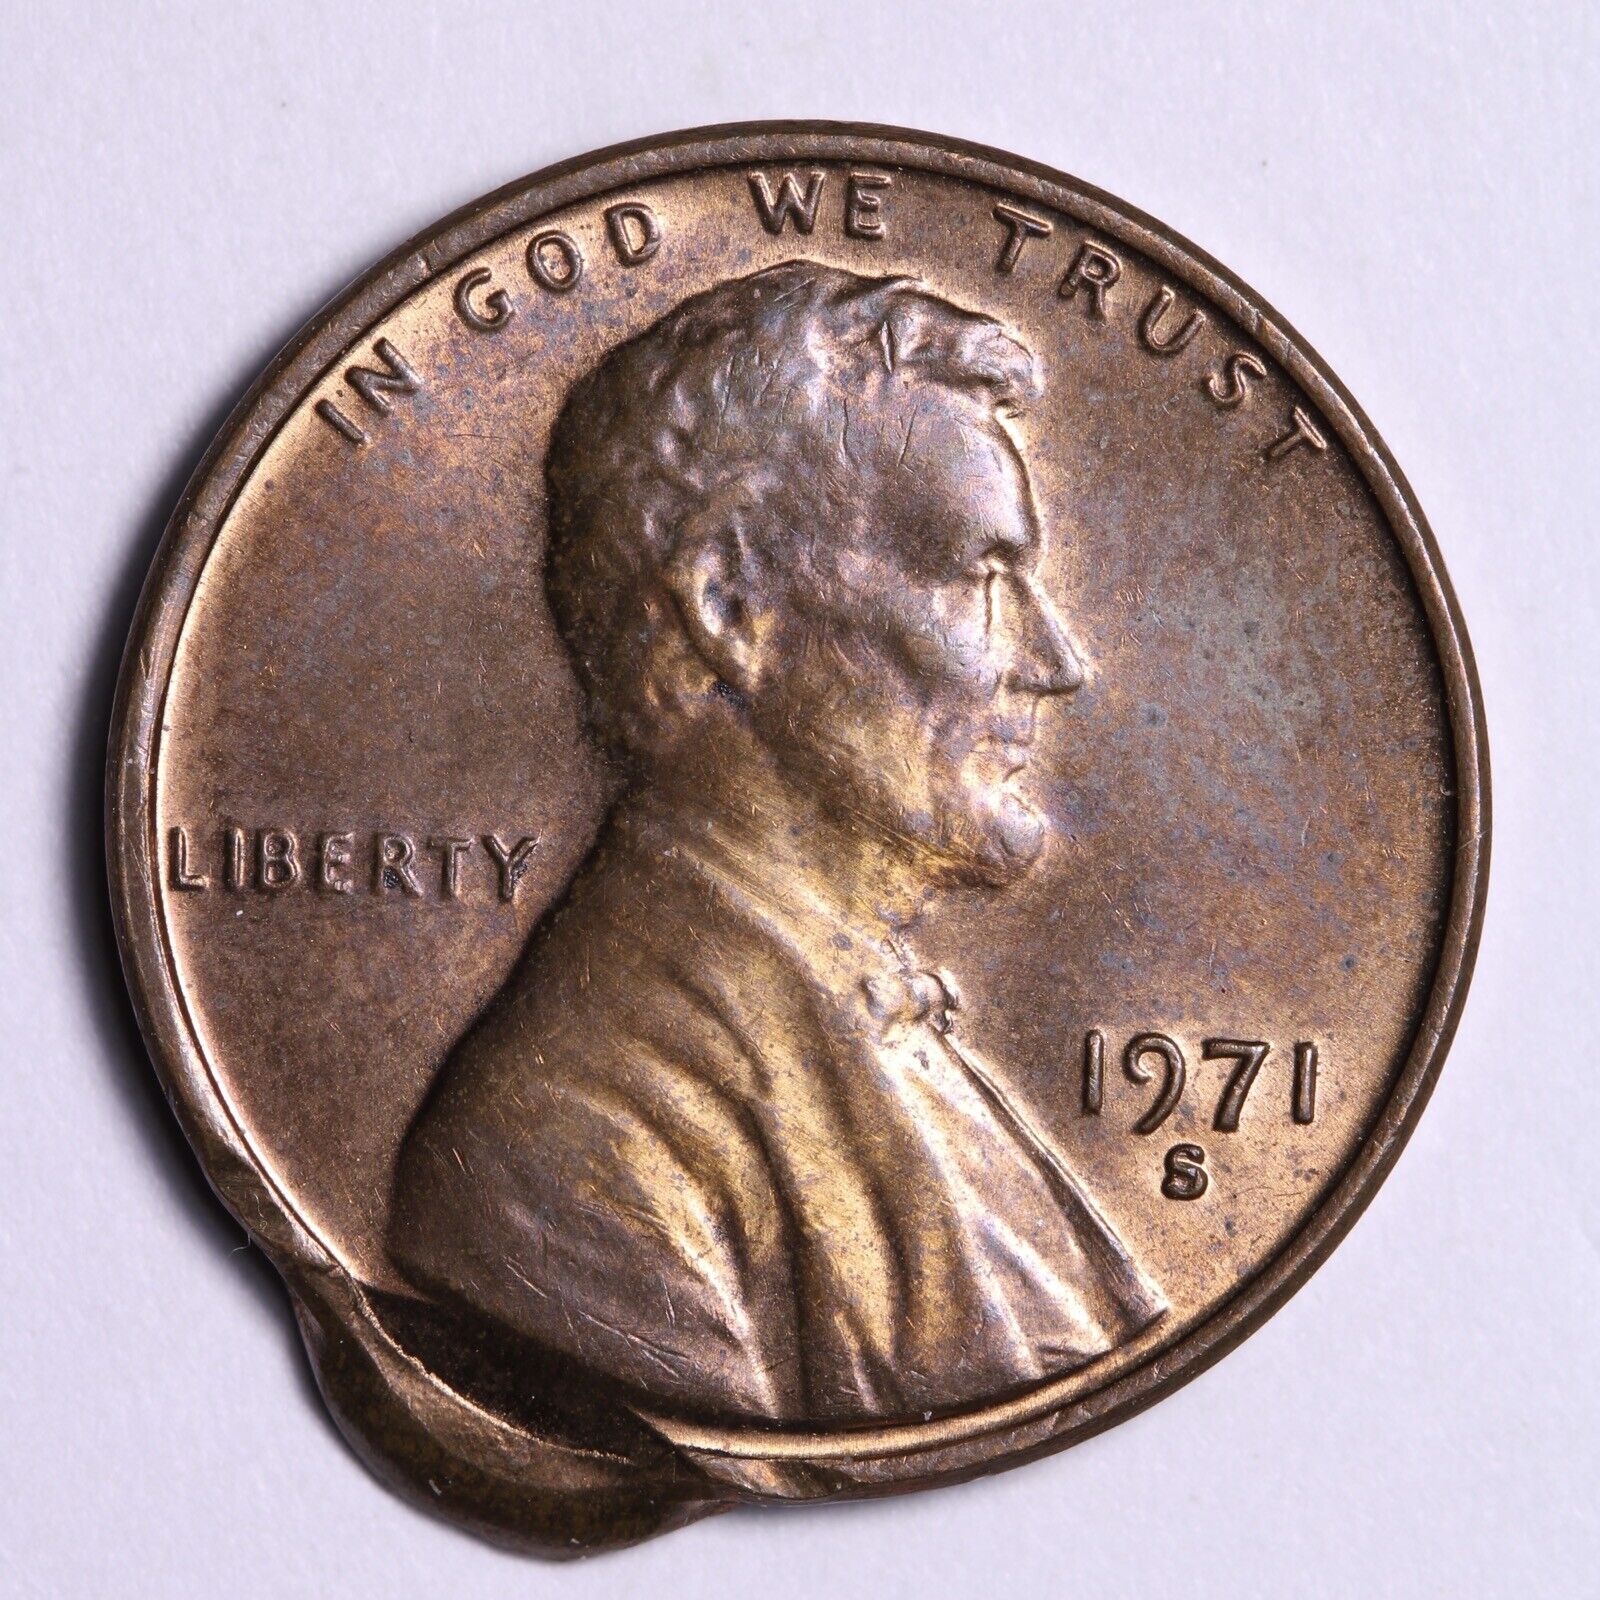 Off Lincoln cent.jpg